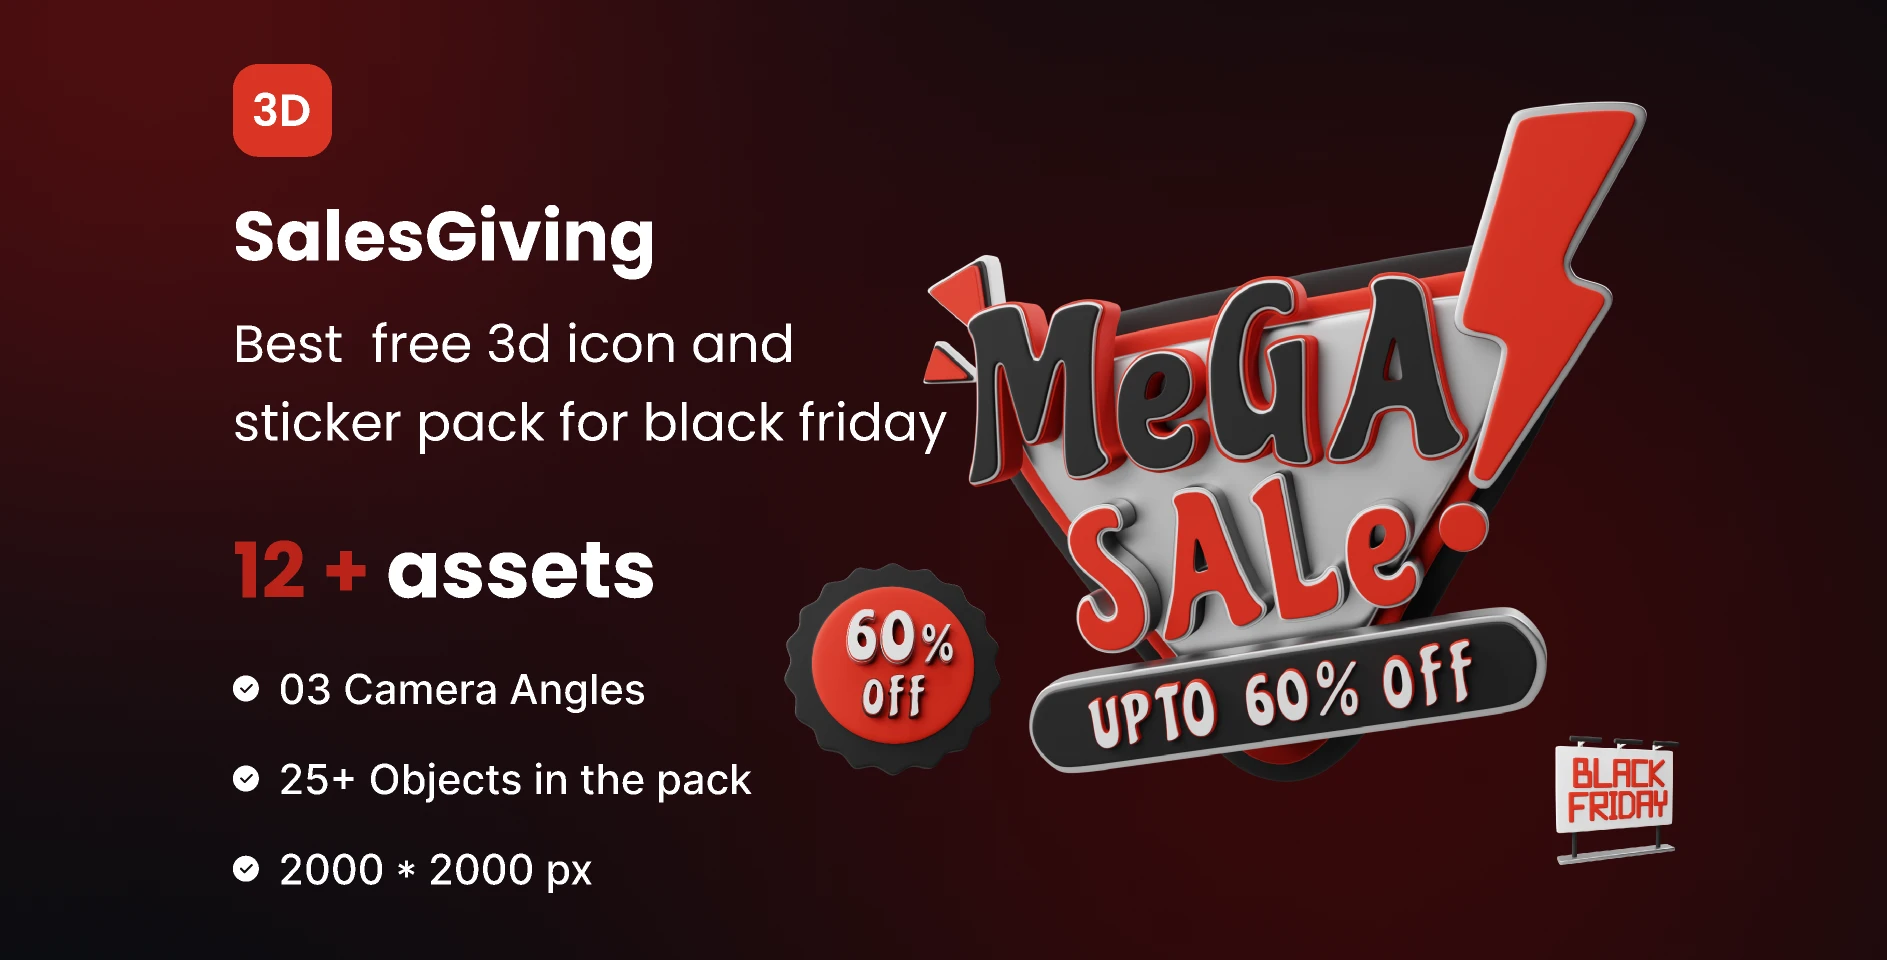 SalesGiving - Best  free 3d icon and sticker pack for black for Figma and Adobe XD